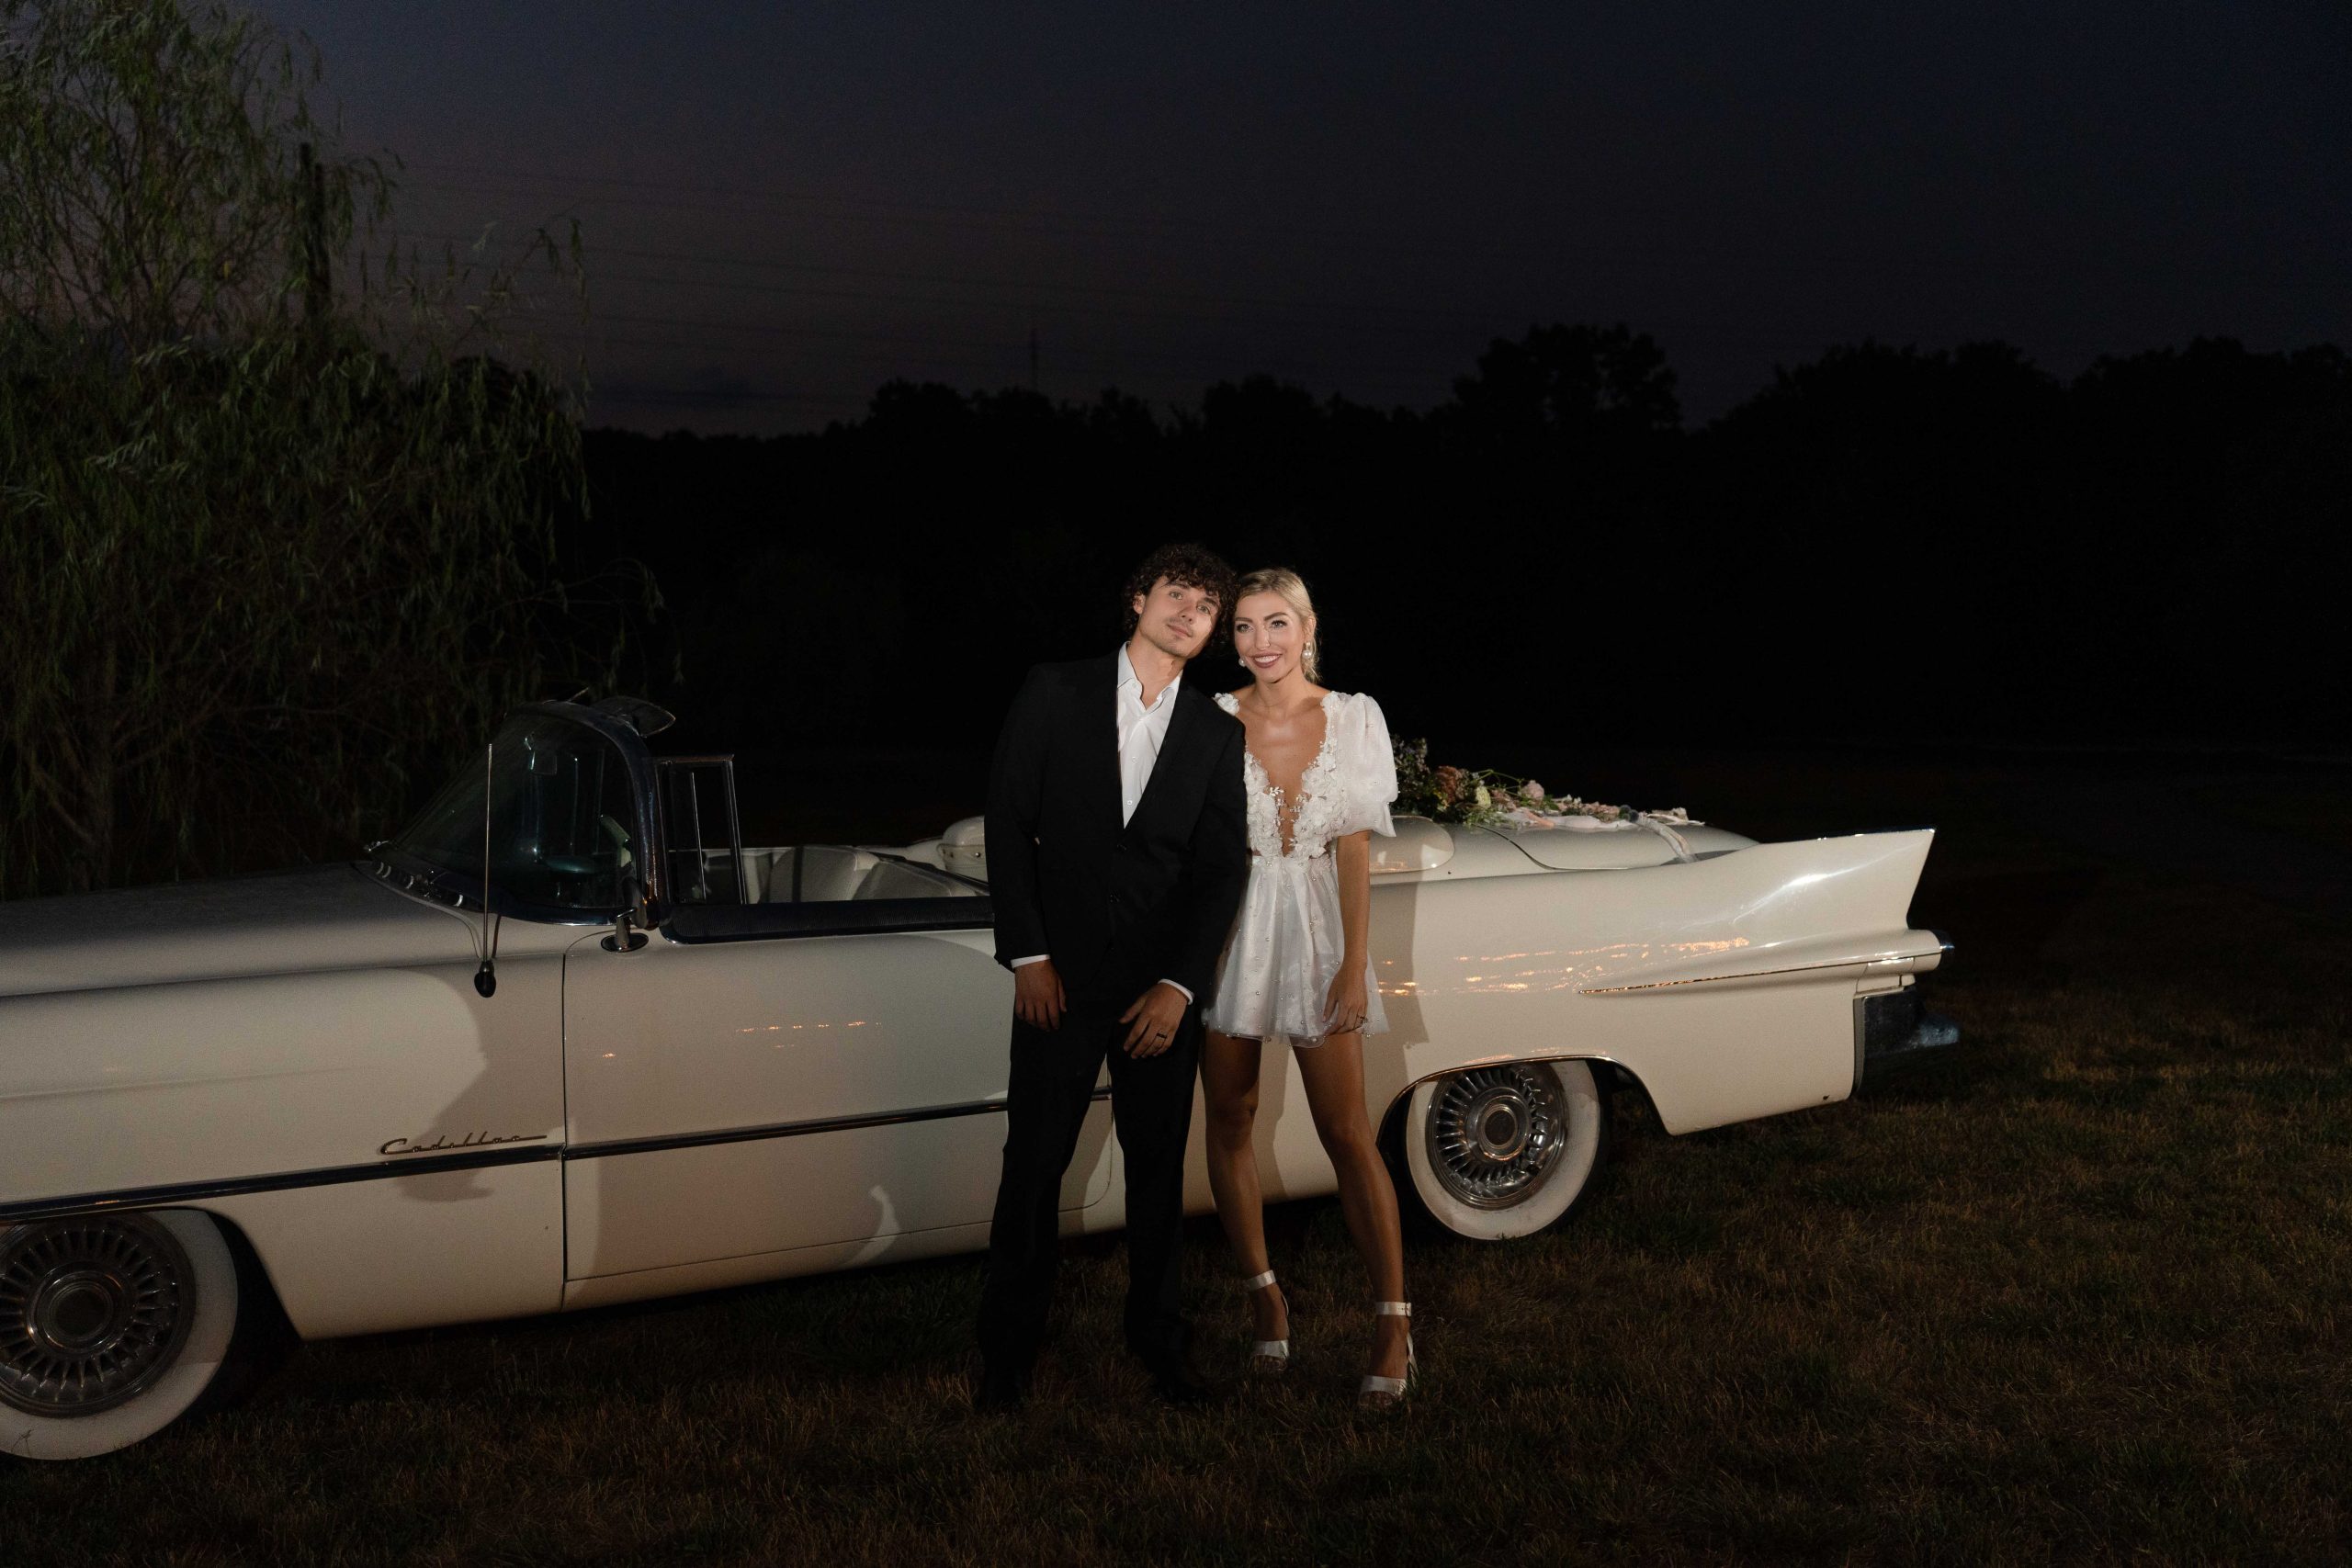 wedding couple photo with classic car at night